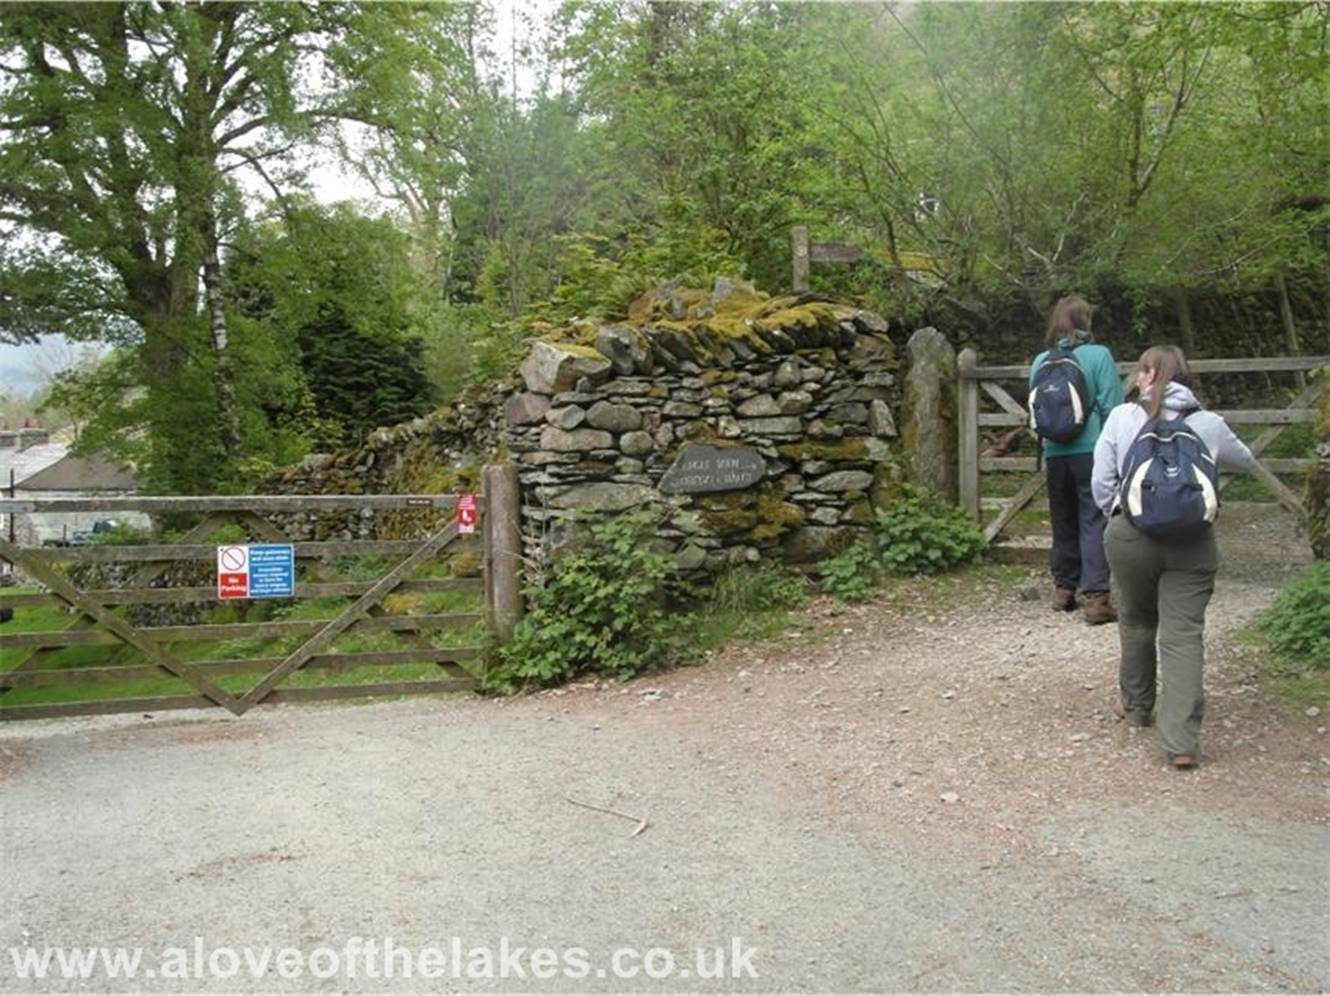 At the end of the path a sign post directs you off to the right through a handgate